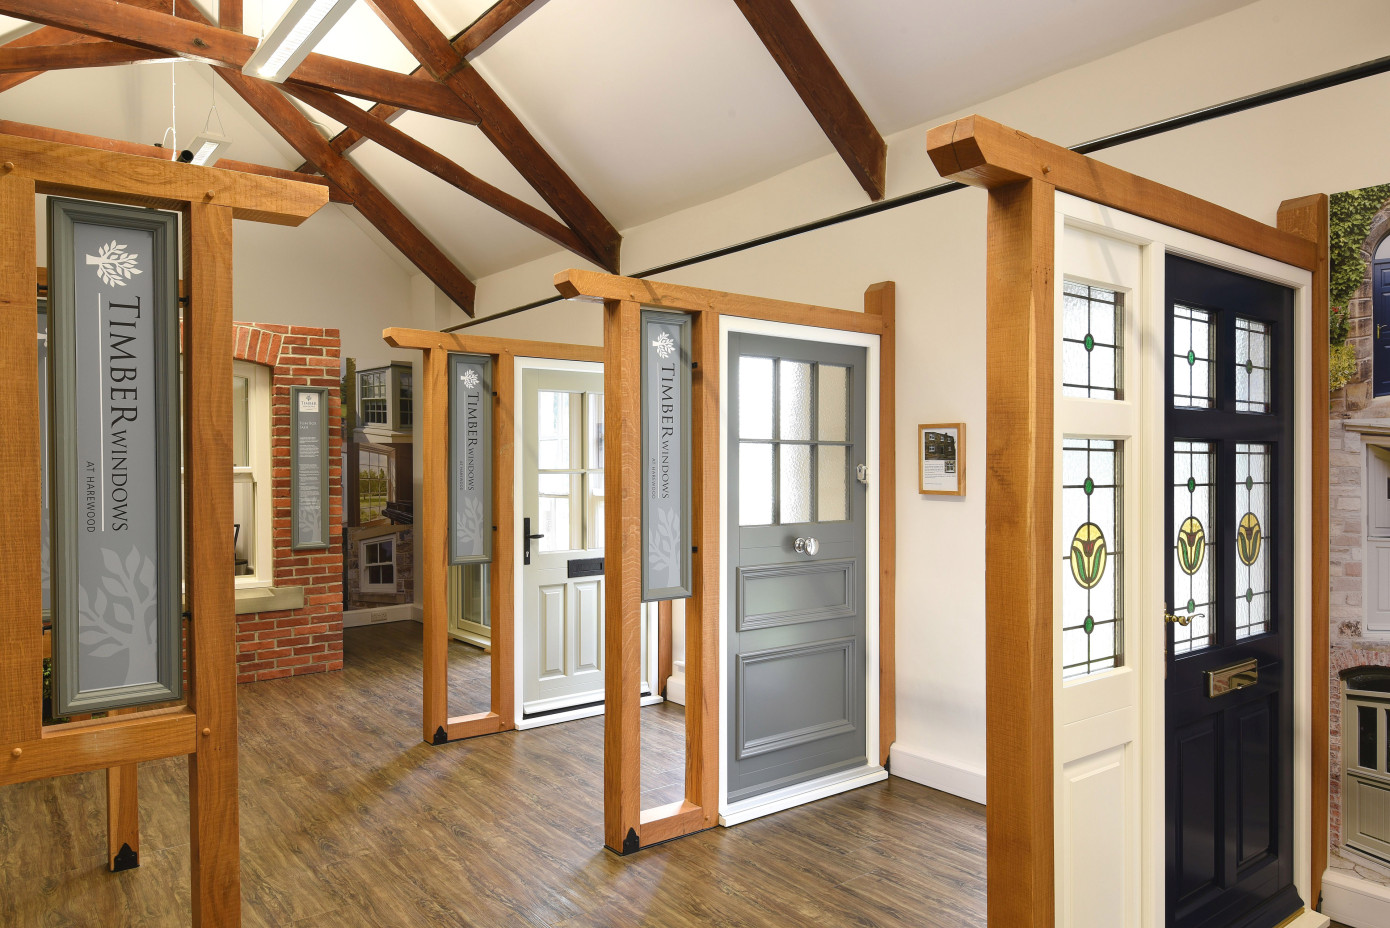 Bergs introduces Timber Windows in Sweden